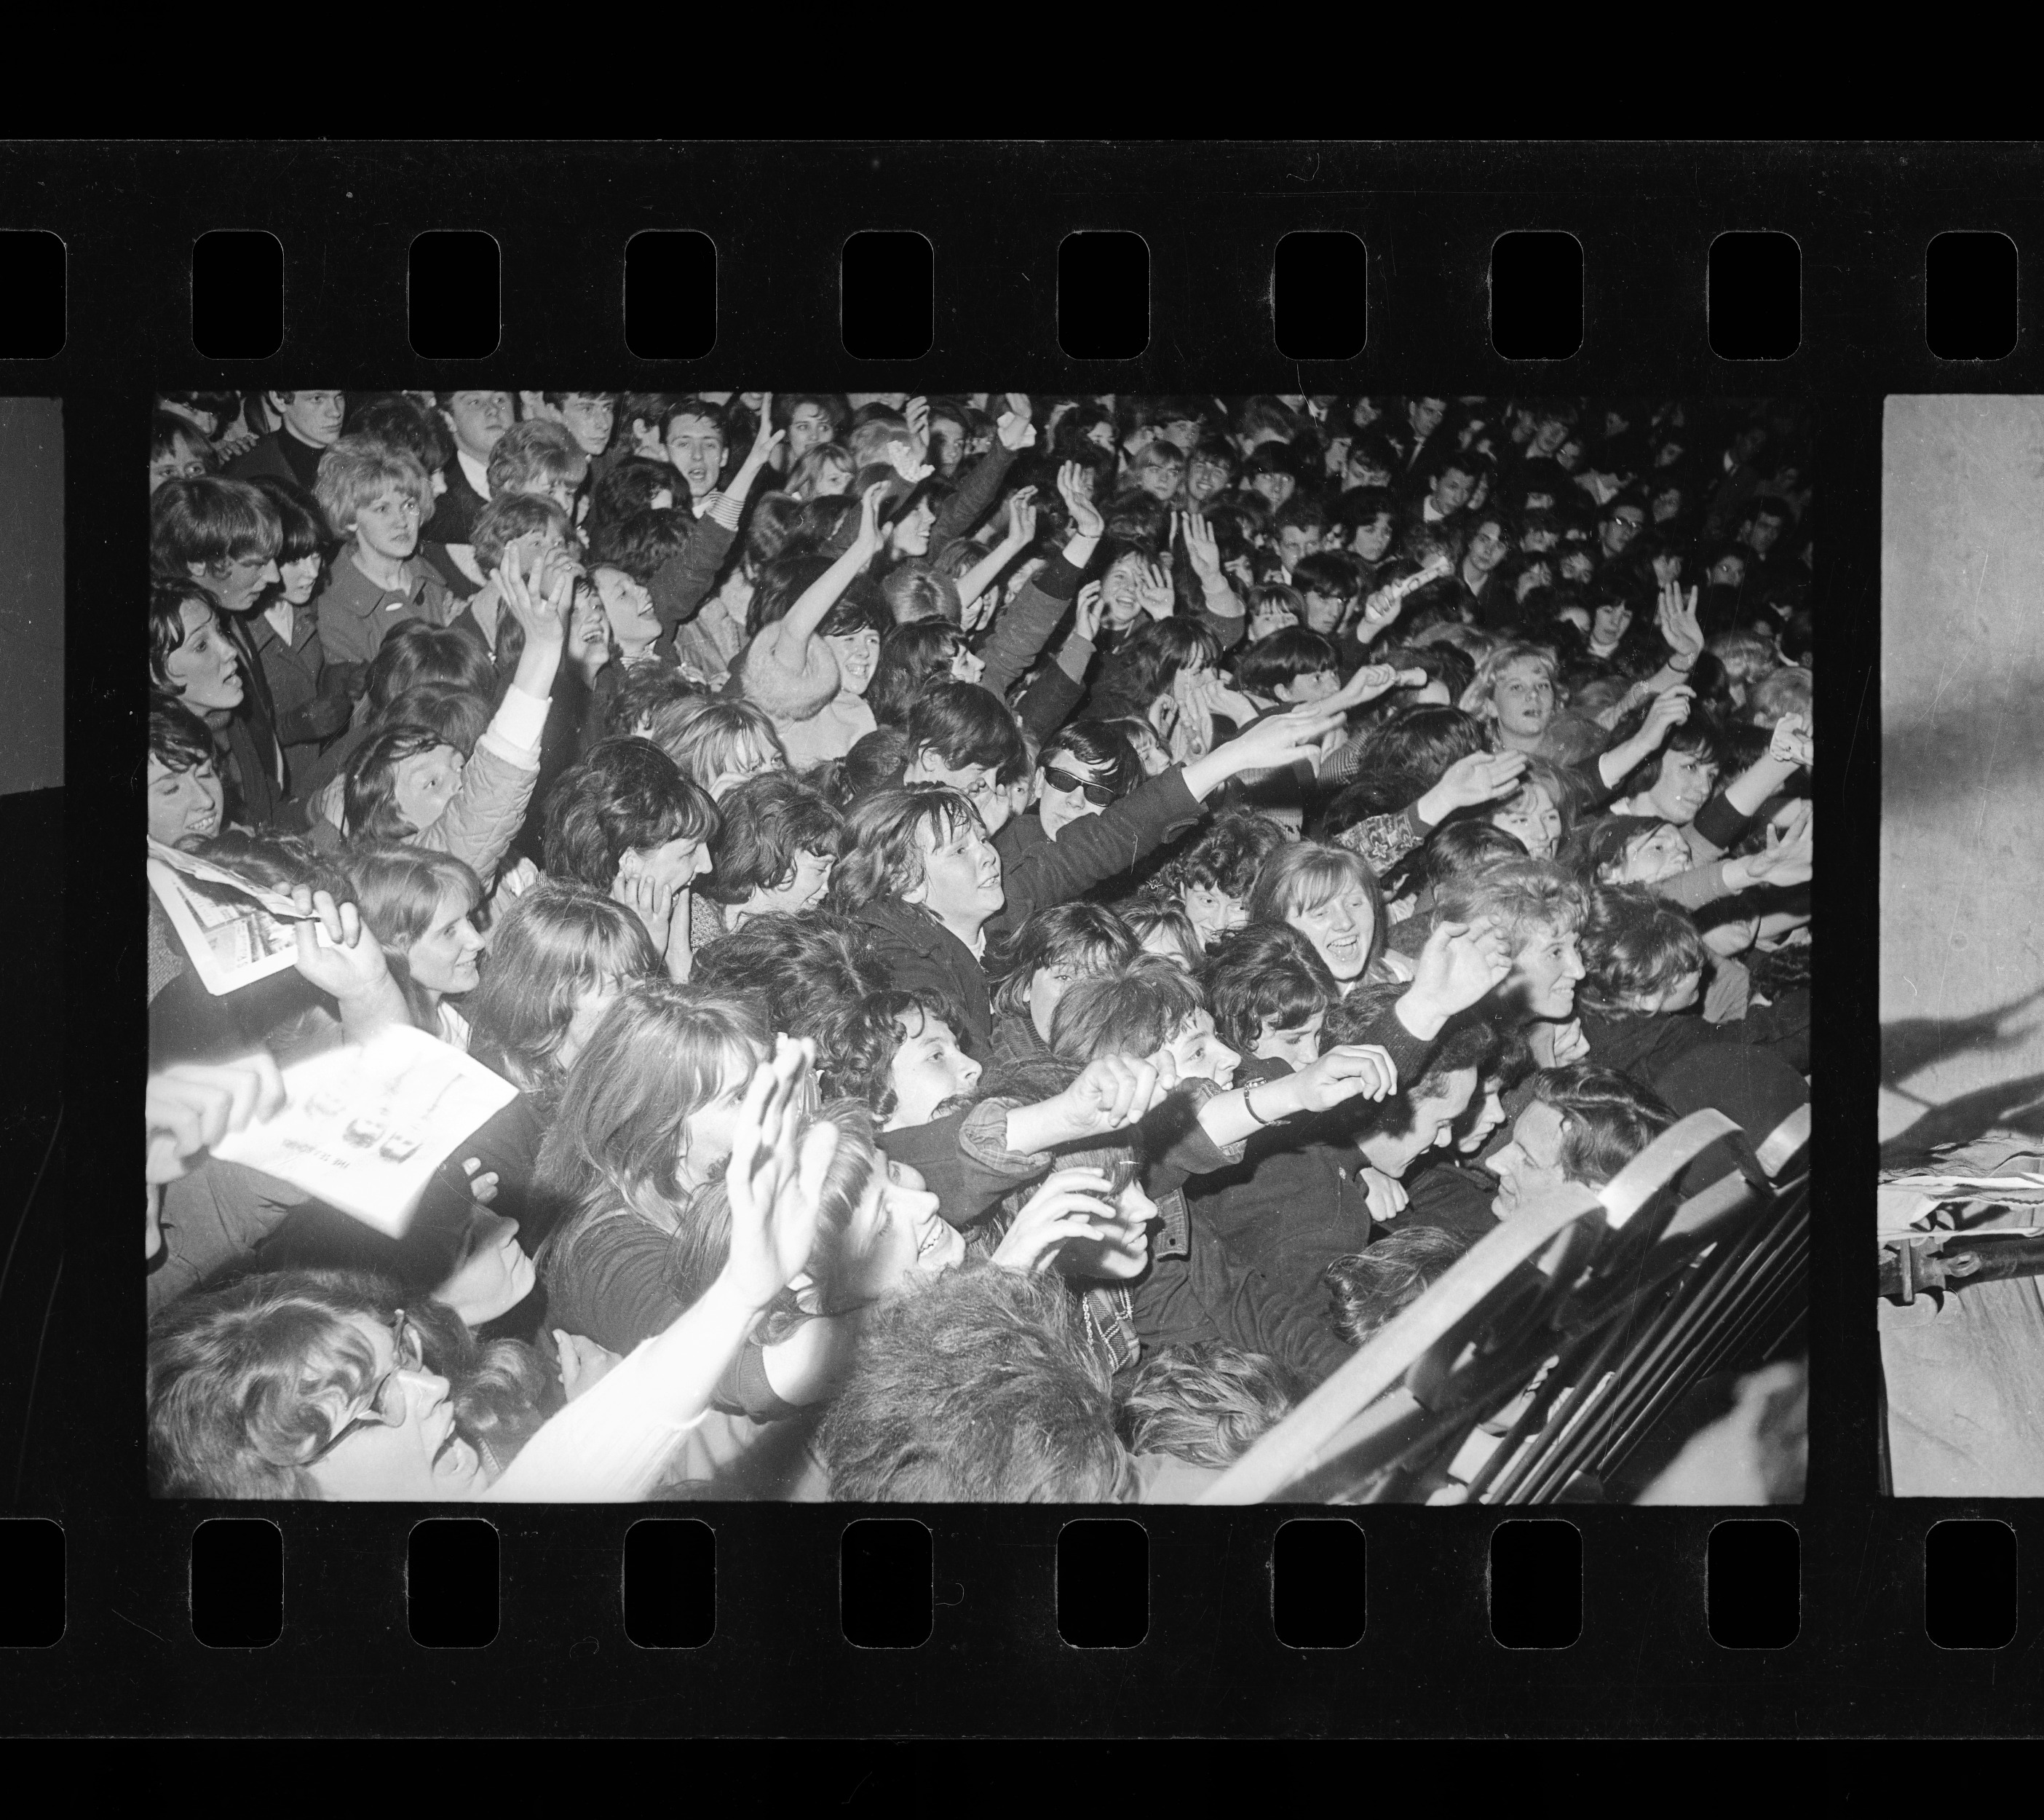 A shot of the crowd during a Beatles concert